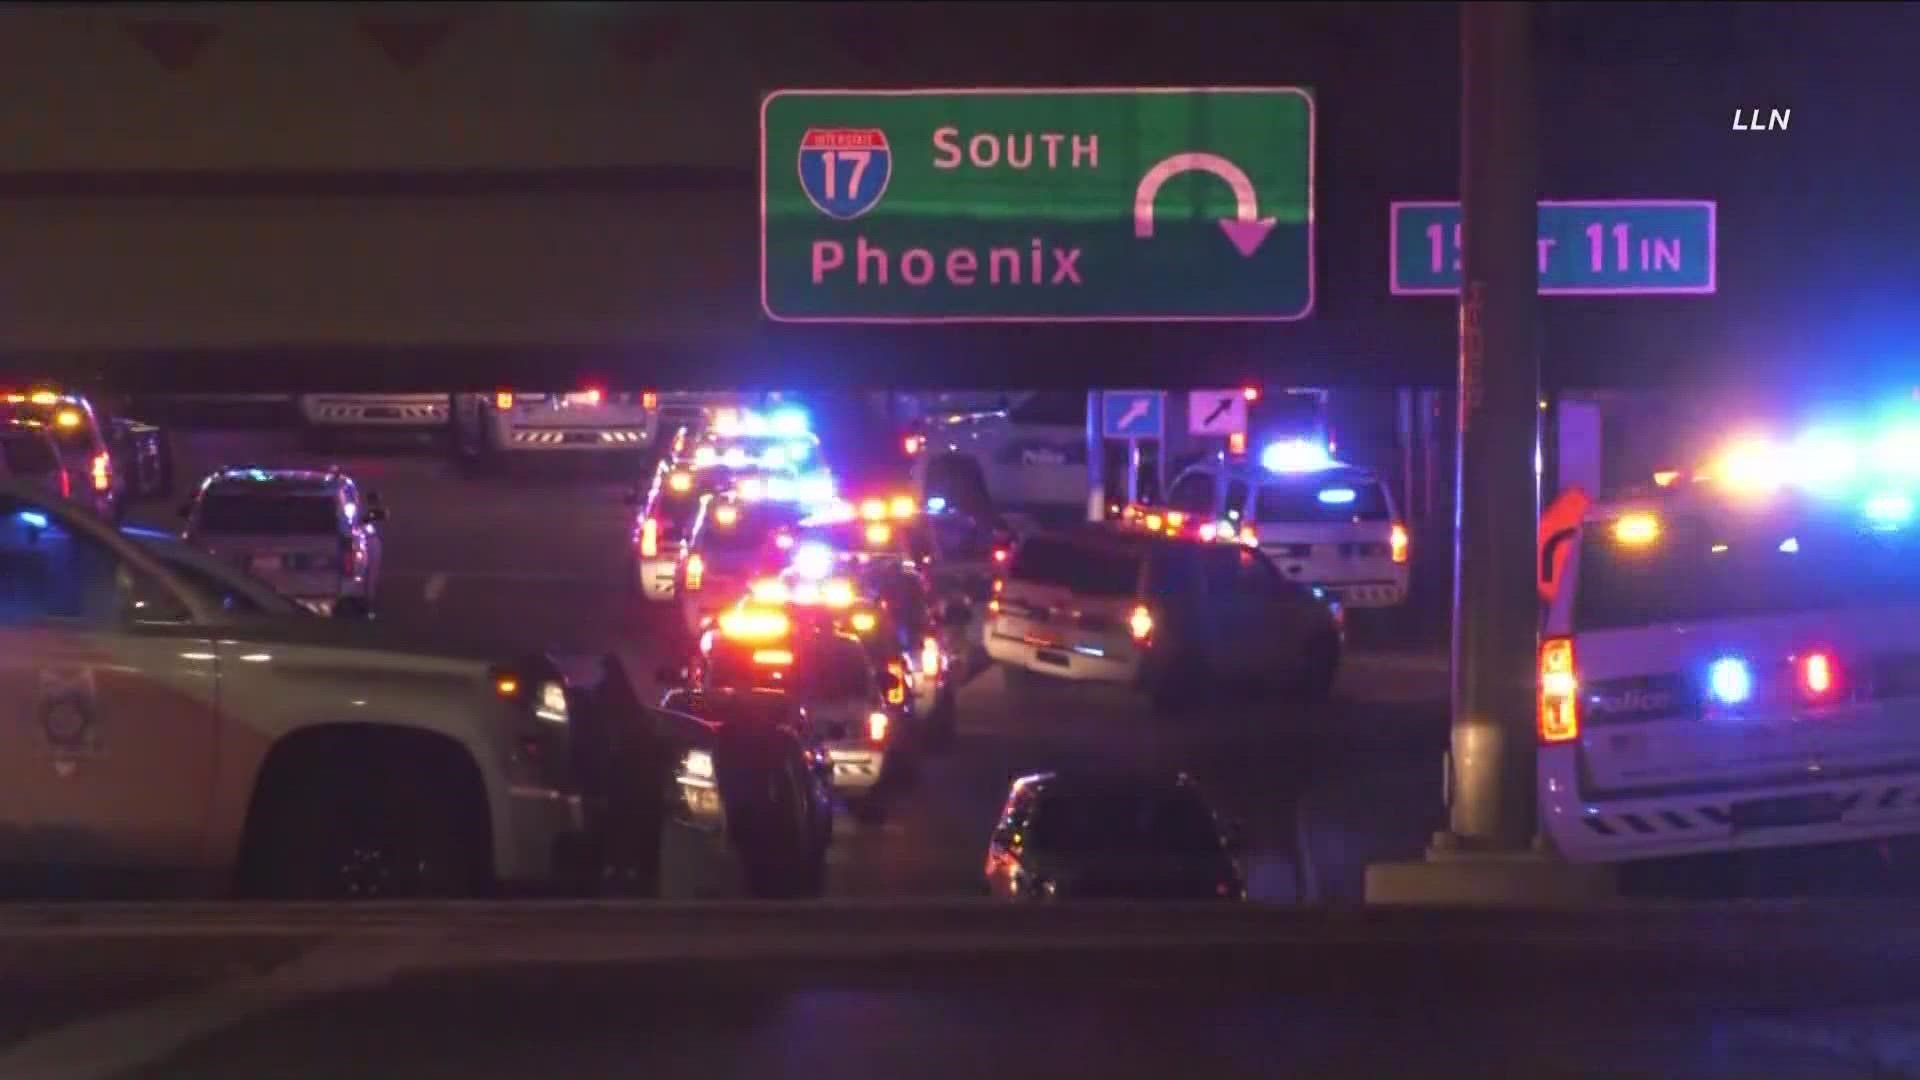 Police identified the alleged shooter who killed two people and wounded five more, including officers, in north Phoenix.